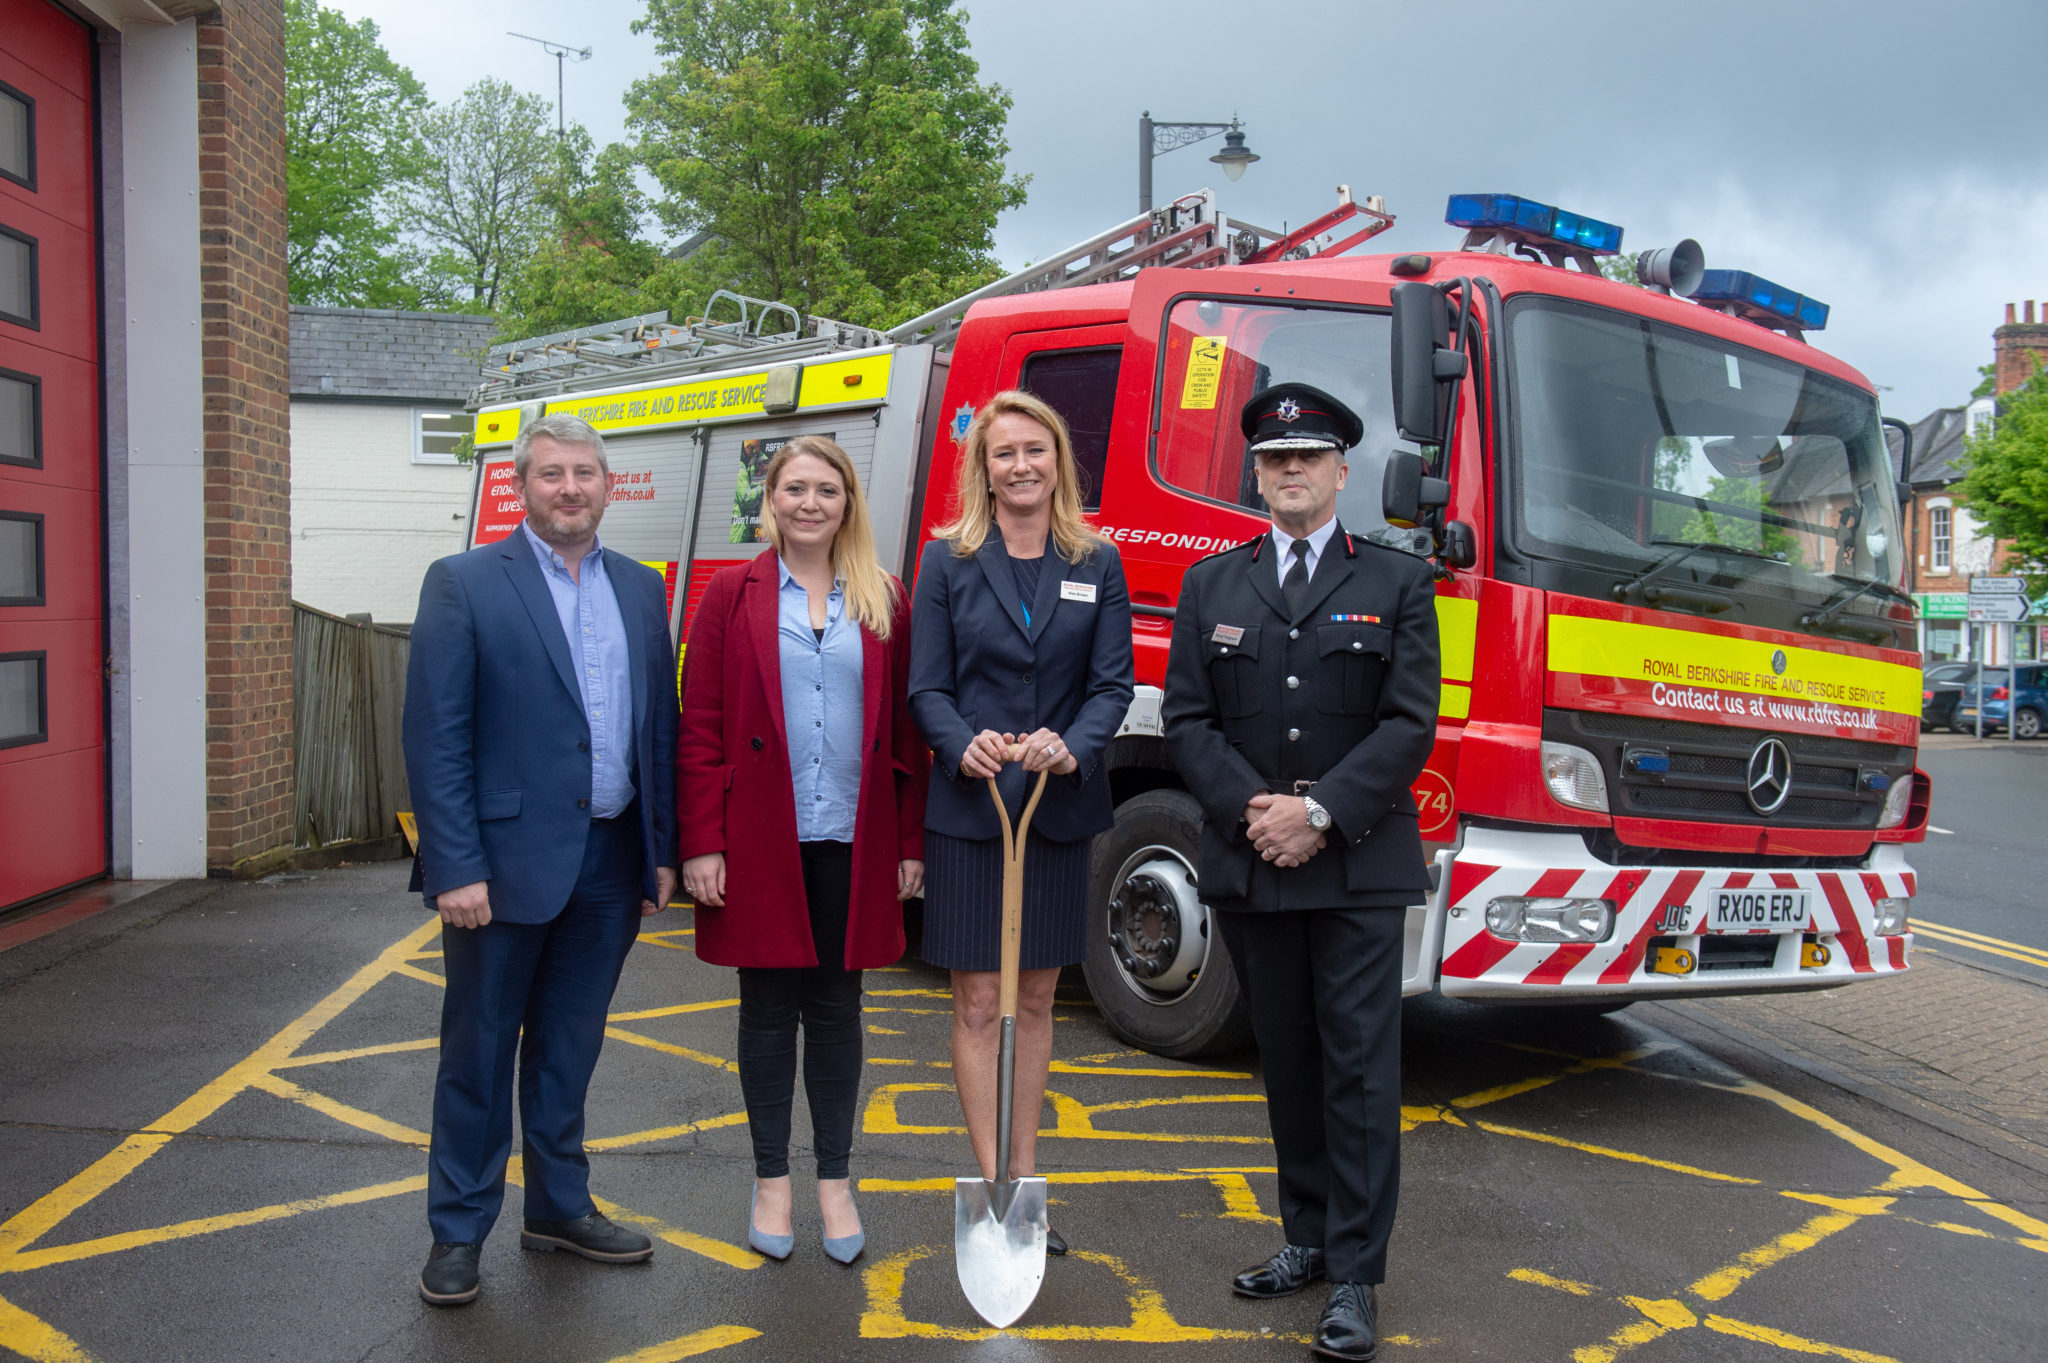 HLM’s Emergency Services Design Expertise Brought to Life as Ground Broken at Crowthorne Community Fire Station